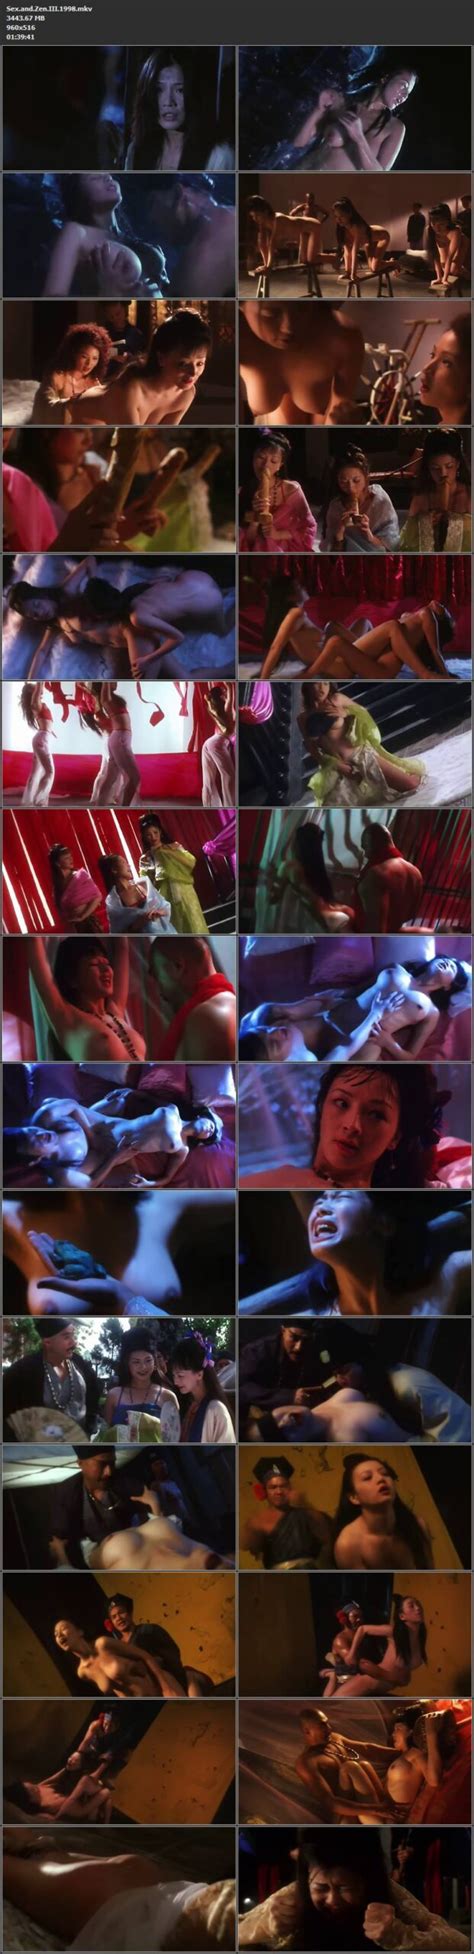 Asian Softcore Erotic Movies Classic Vintage Av [nf] [rg] Page 43 Intporn Forums